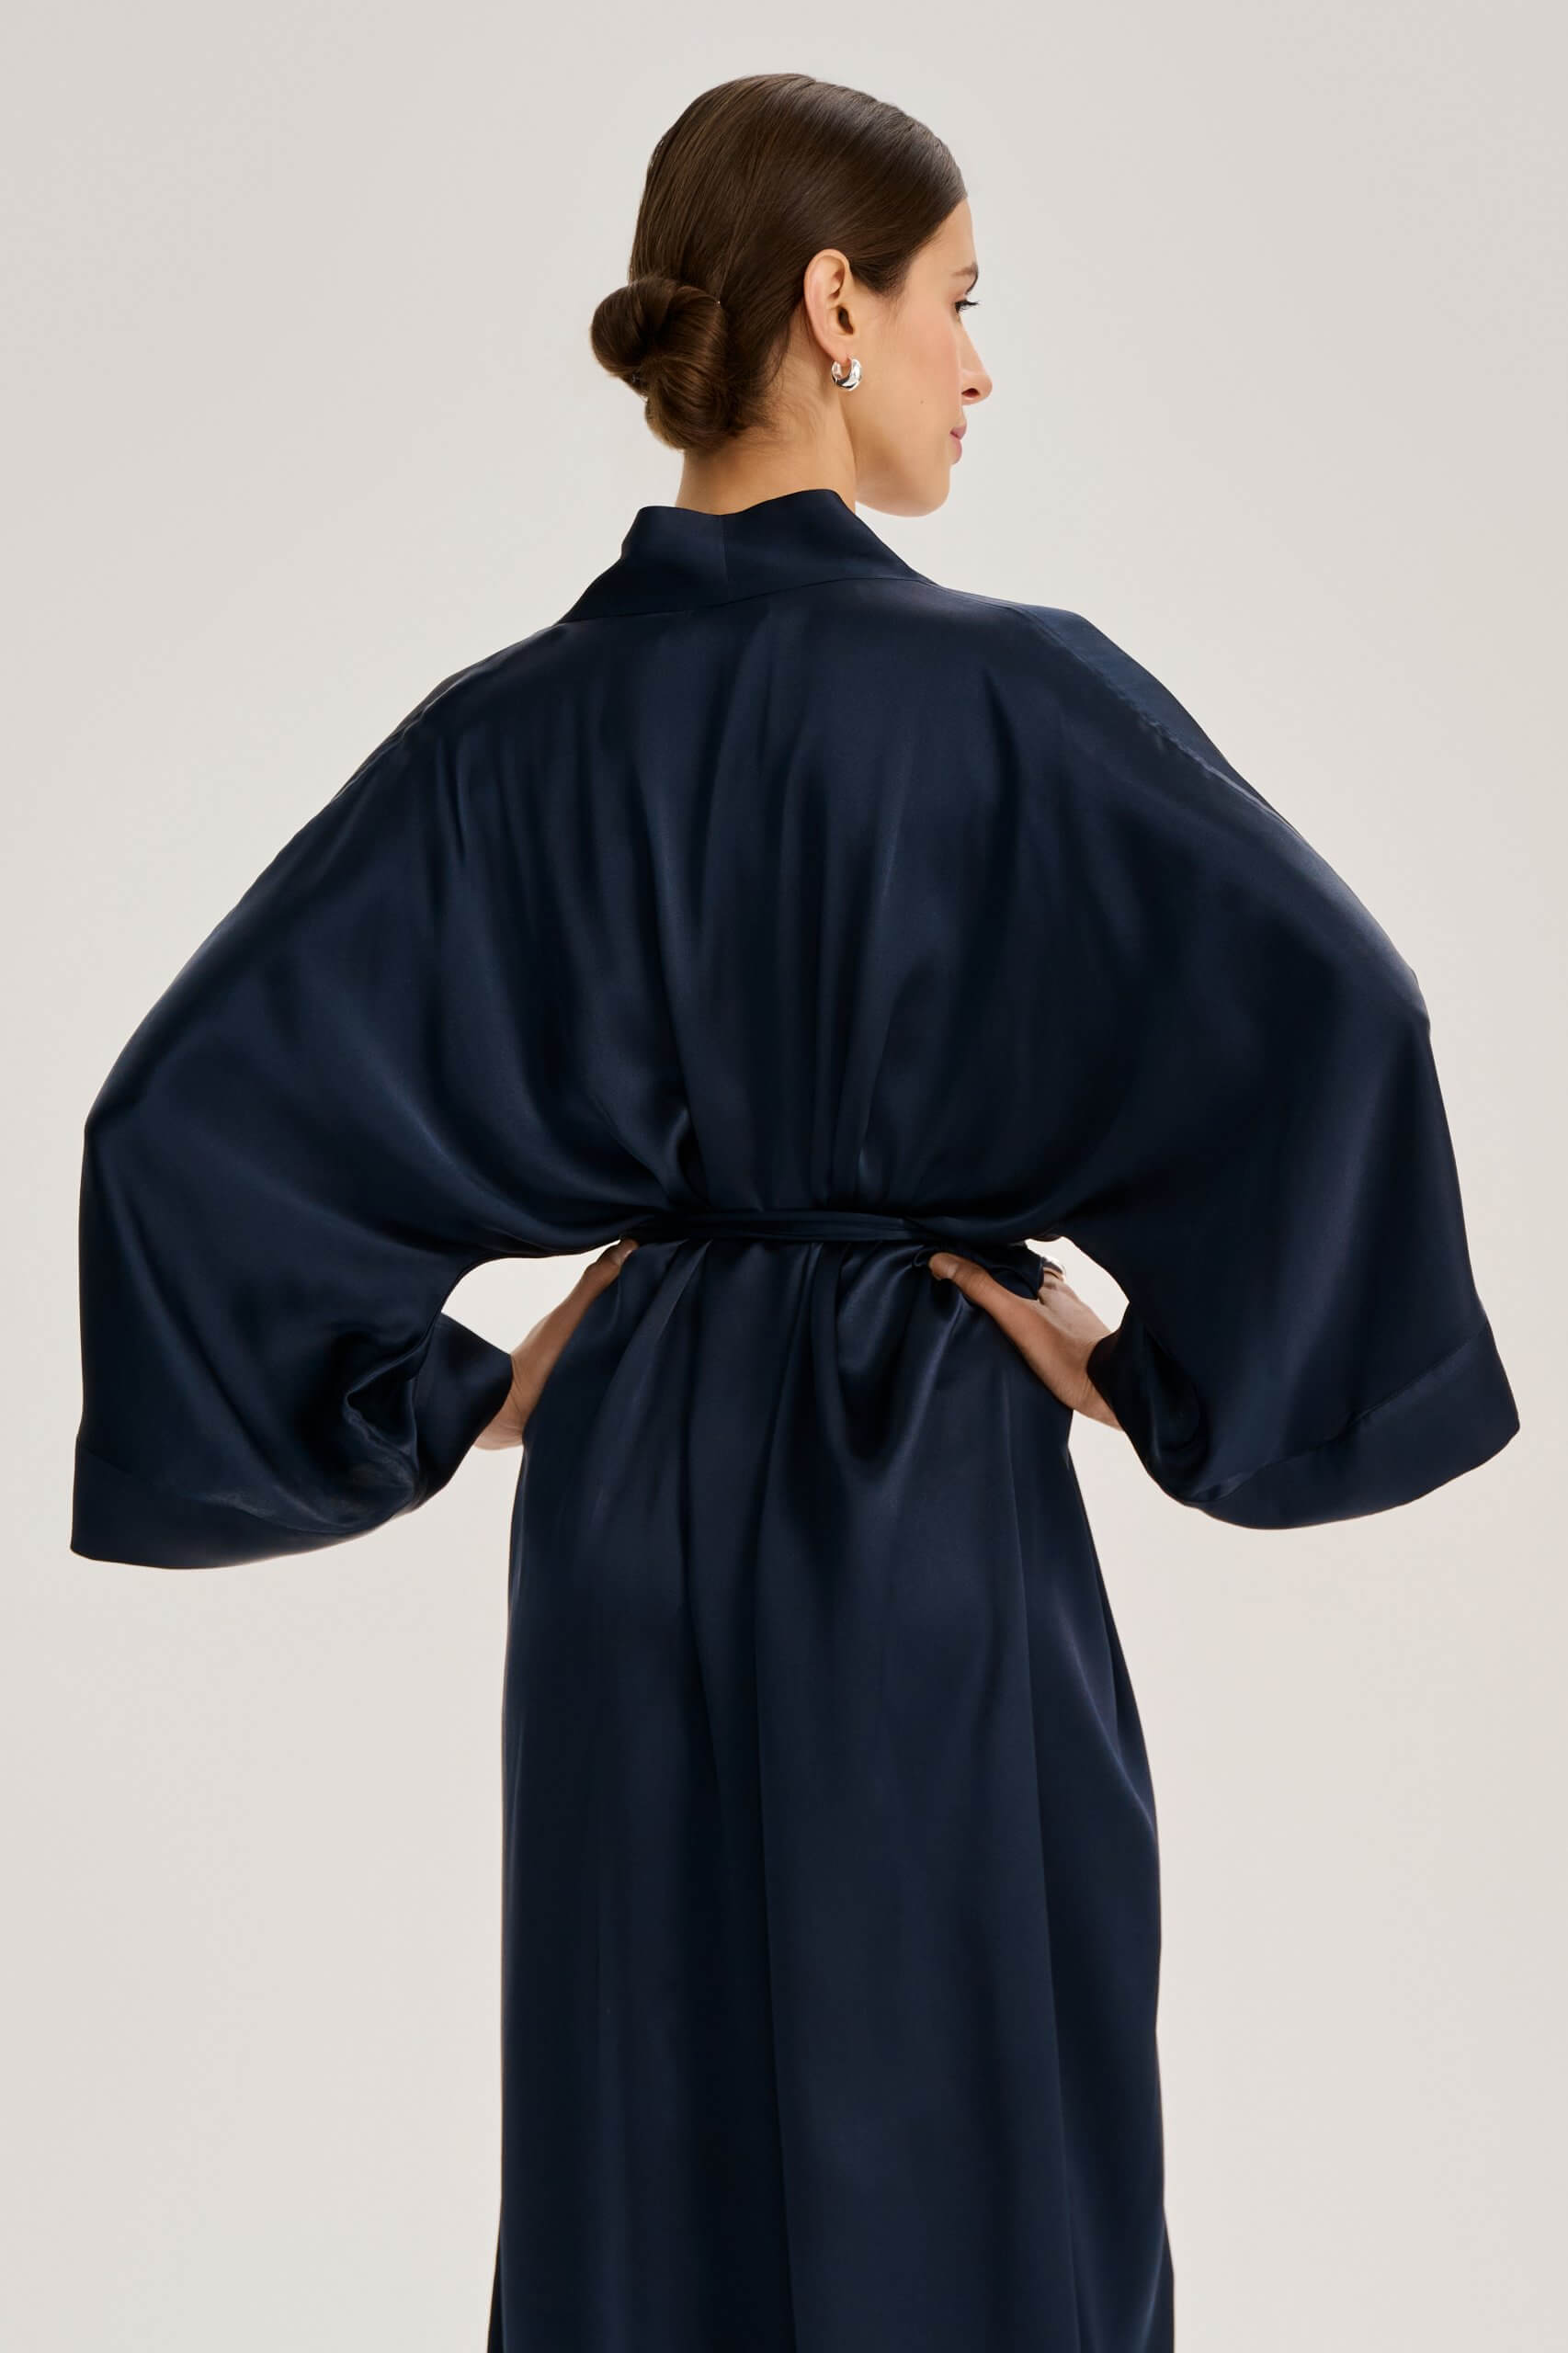 SILK KIMONO DRESS FROM THE MOON COLLECTION